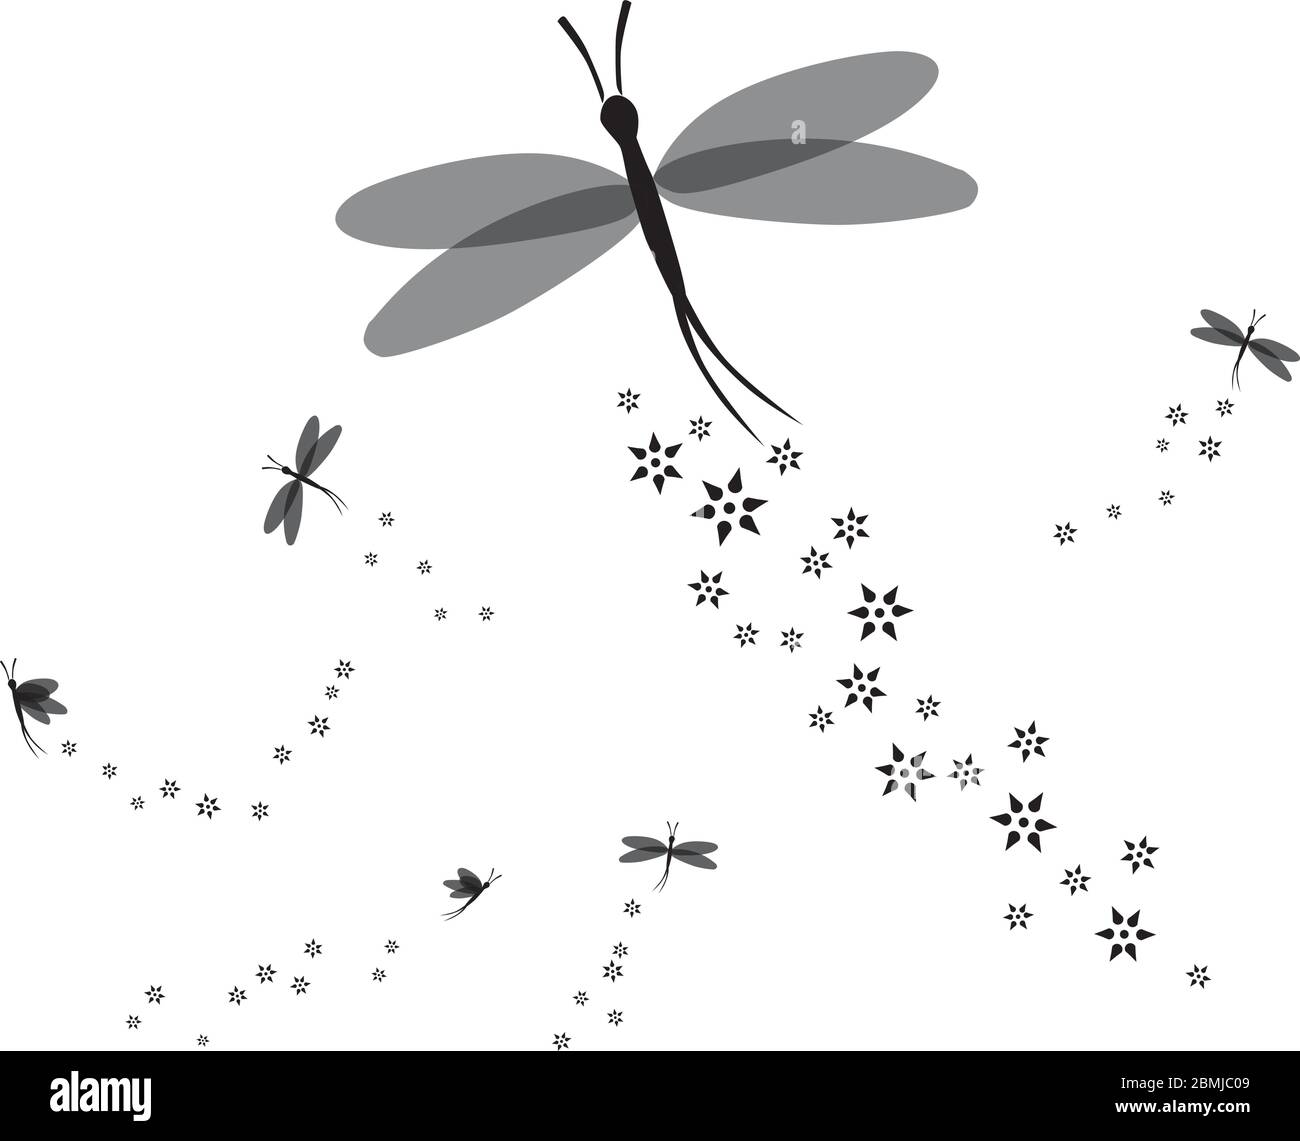 dragonfly insect silhouette vector shadow fly ornament Stock Vector